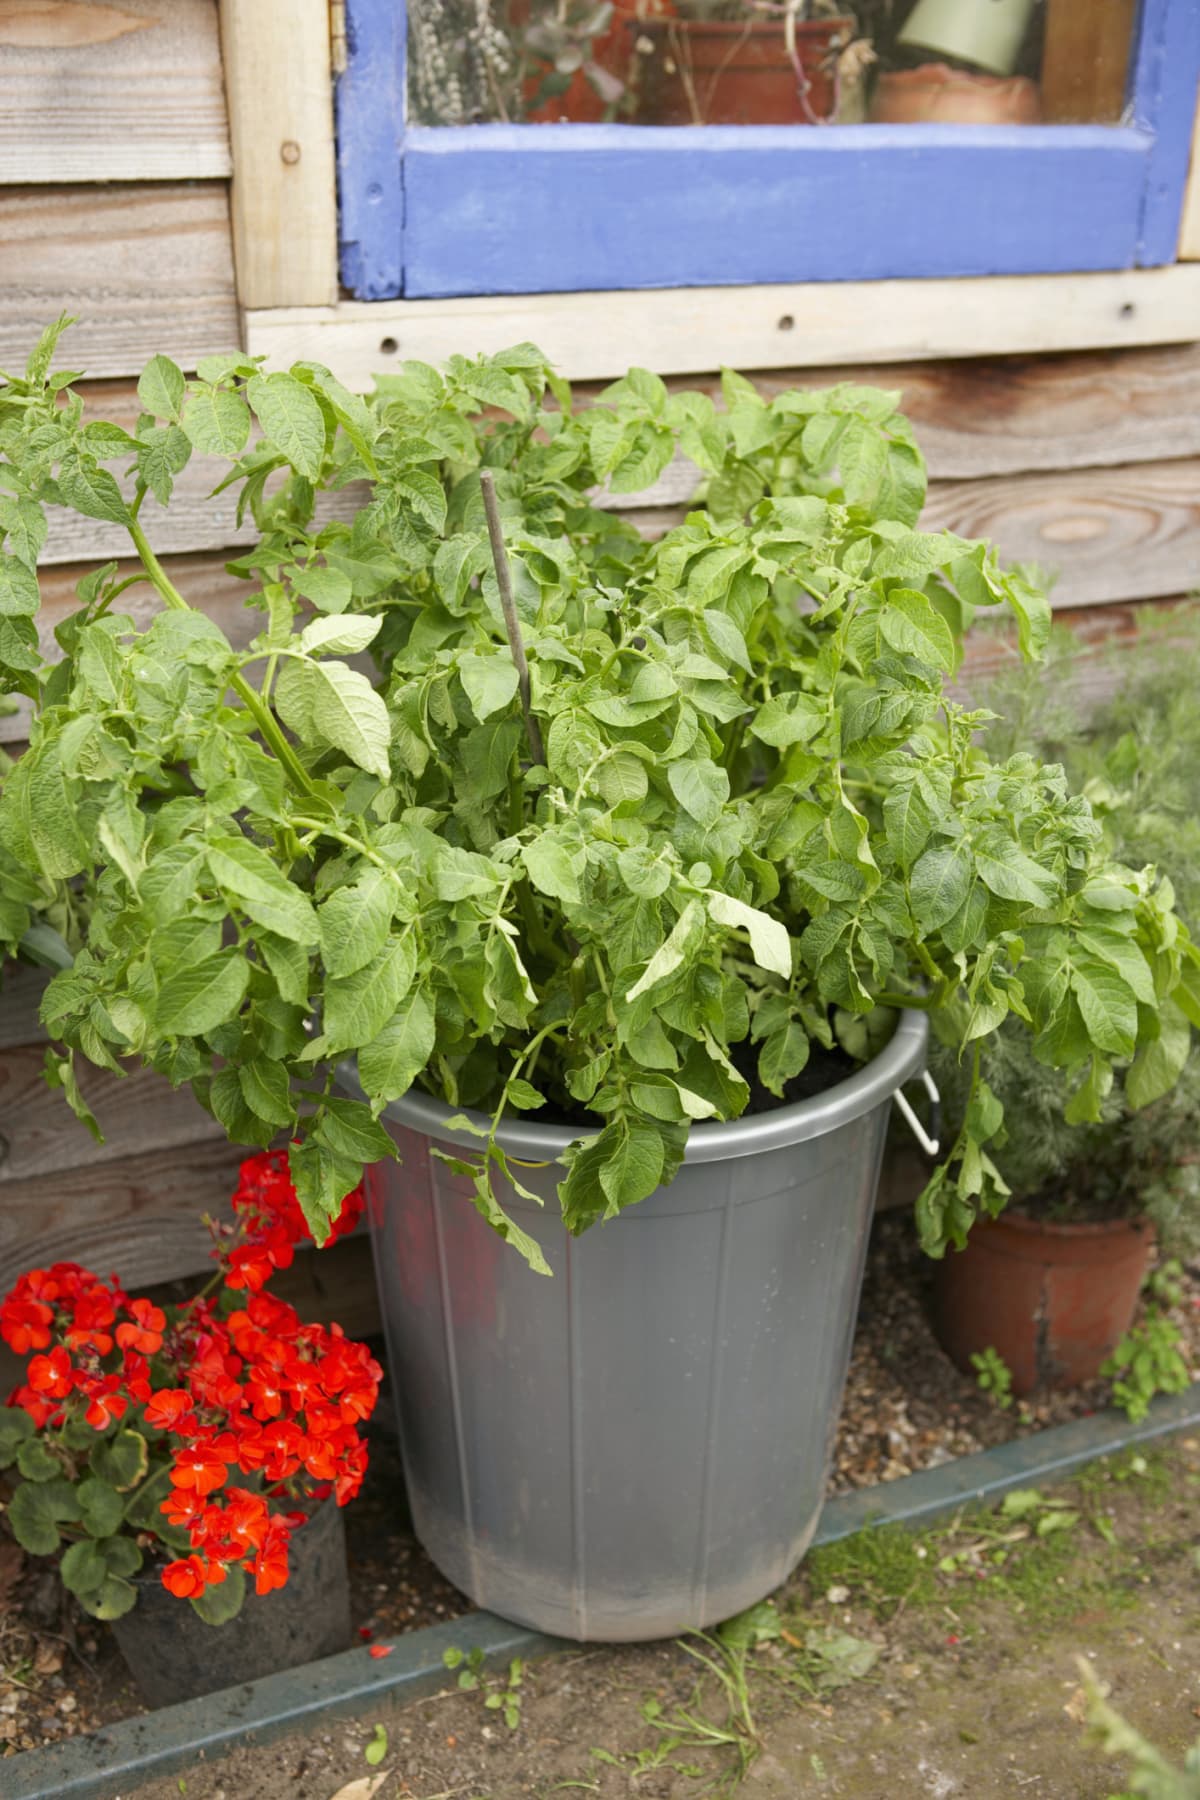 Potato plant in large pot outdoors